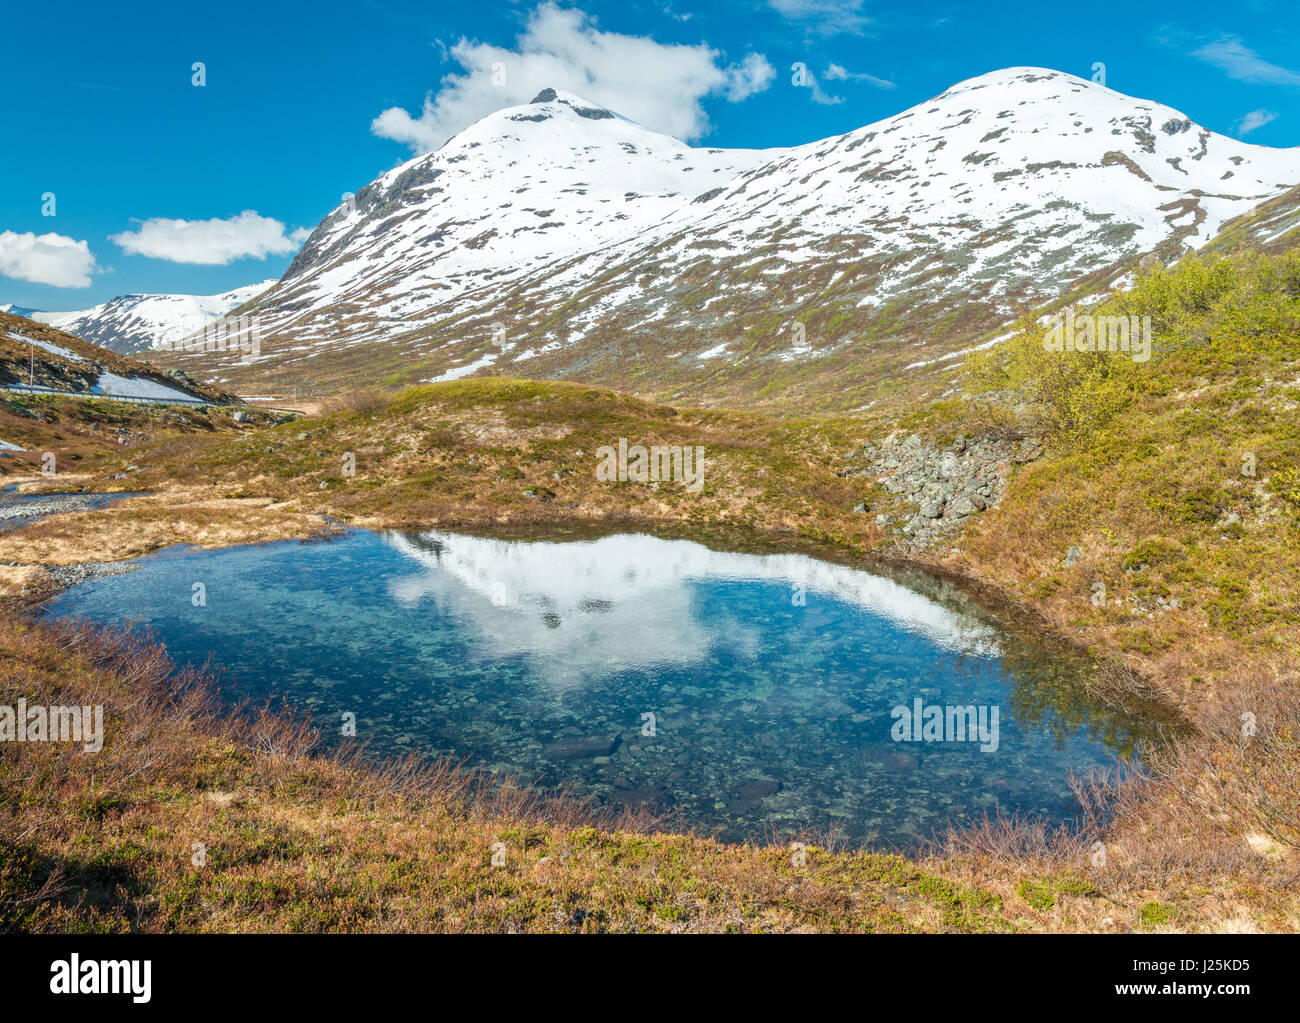 Alpine tarn, pond reflects snowcapped mountains on the other side of the Troll Wall, Norway Stock Photo